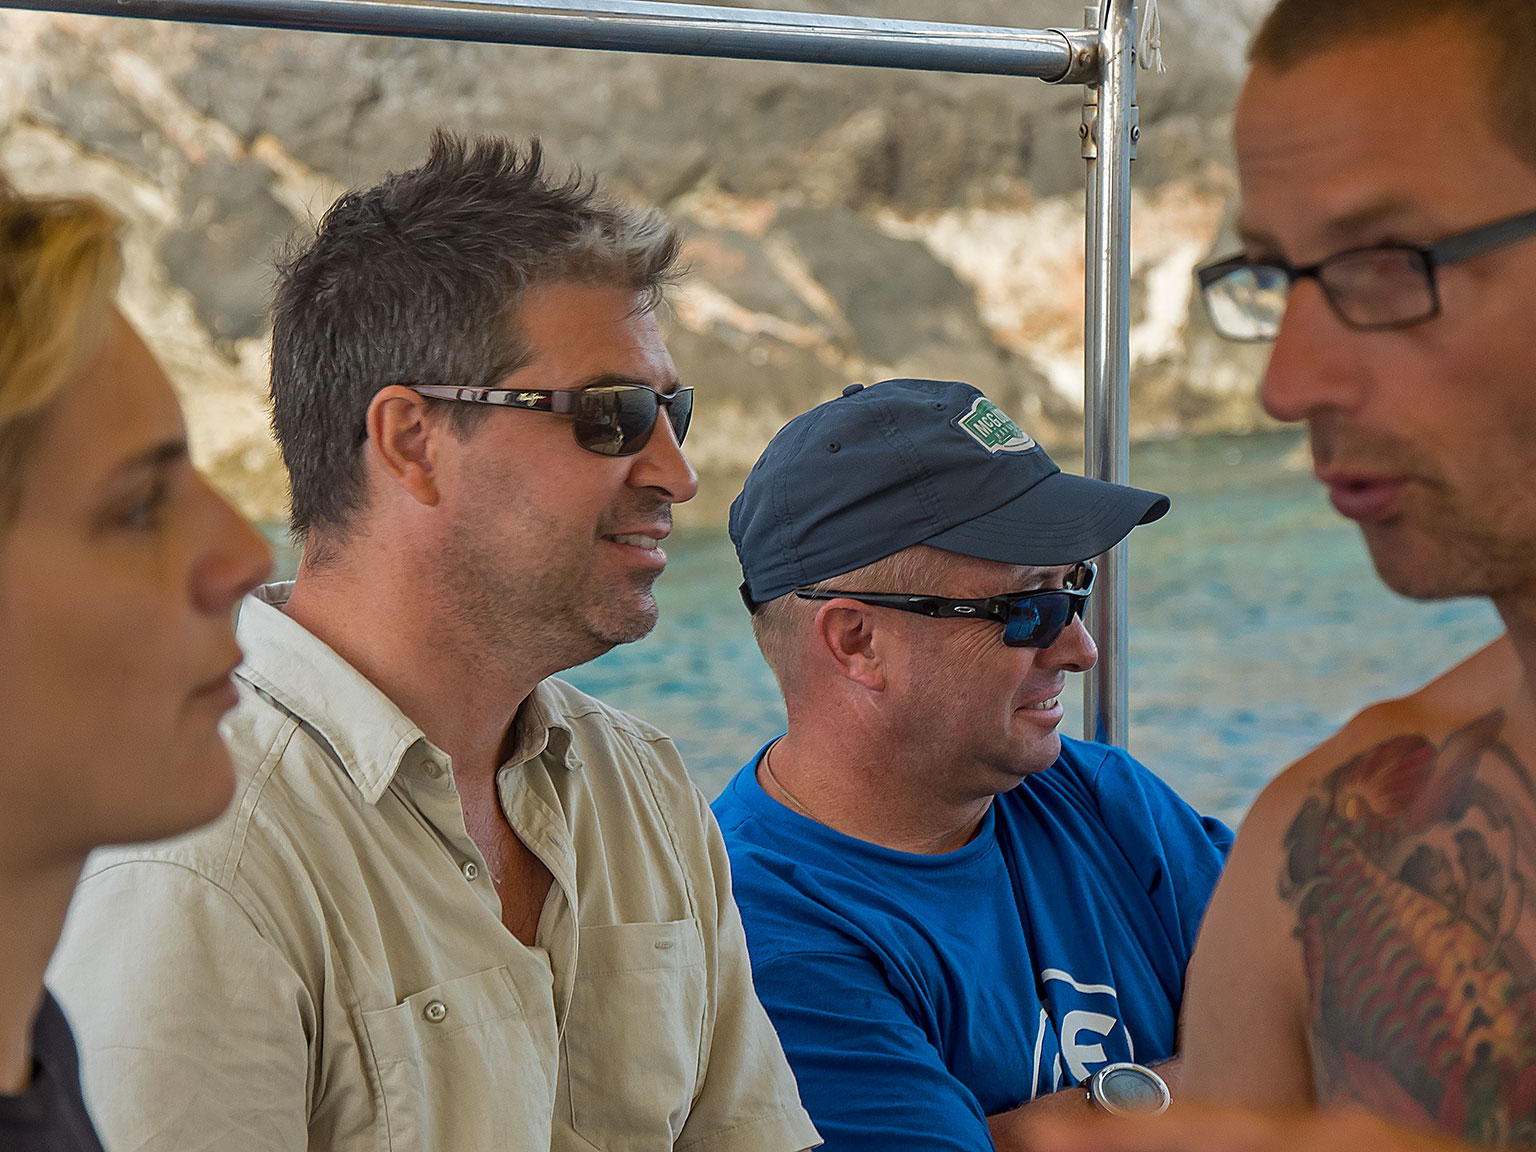 Archaeologists Dr. Brendan Foley & Dr. Dave Conlin waiting for their dive slot.